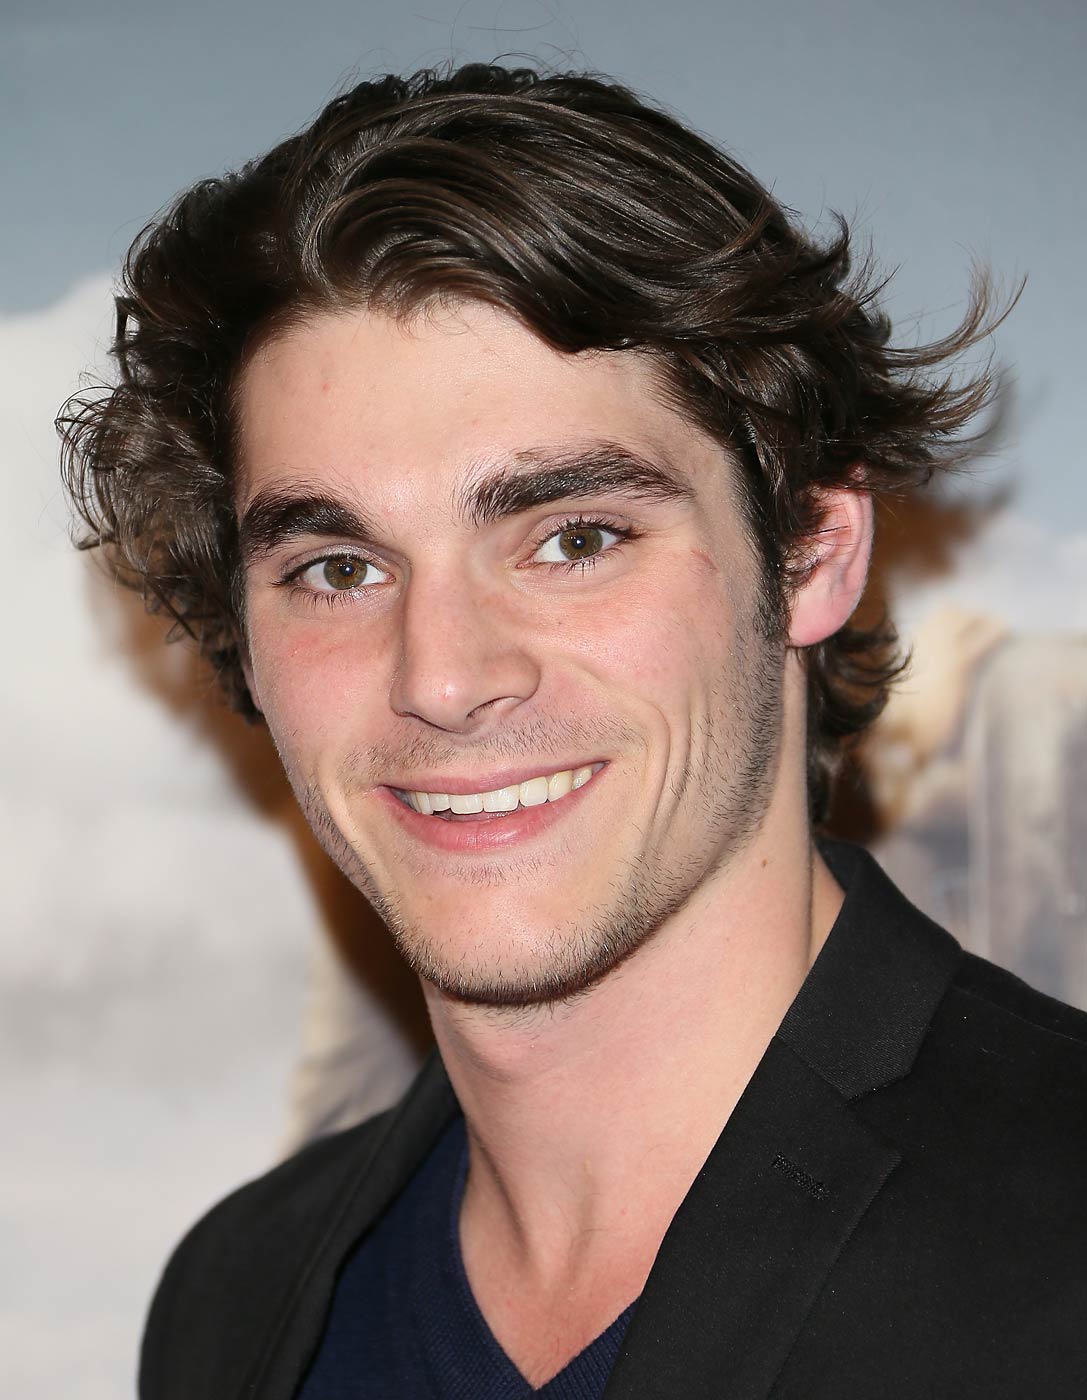 RJ Mitte attends the <i>Better Call Saul</i> Los Angeles Series Premiere Screening held at Regal Cinemas L.A. Live on Jan. 29, 2015 in Los Angeles, Calif. (JB Lacroix—WireImage/Getty Images)